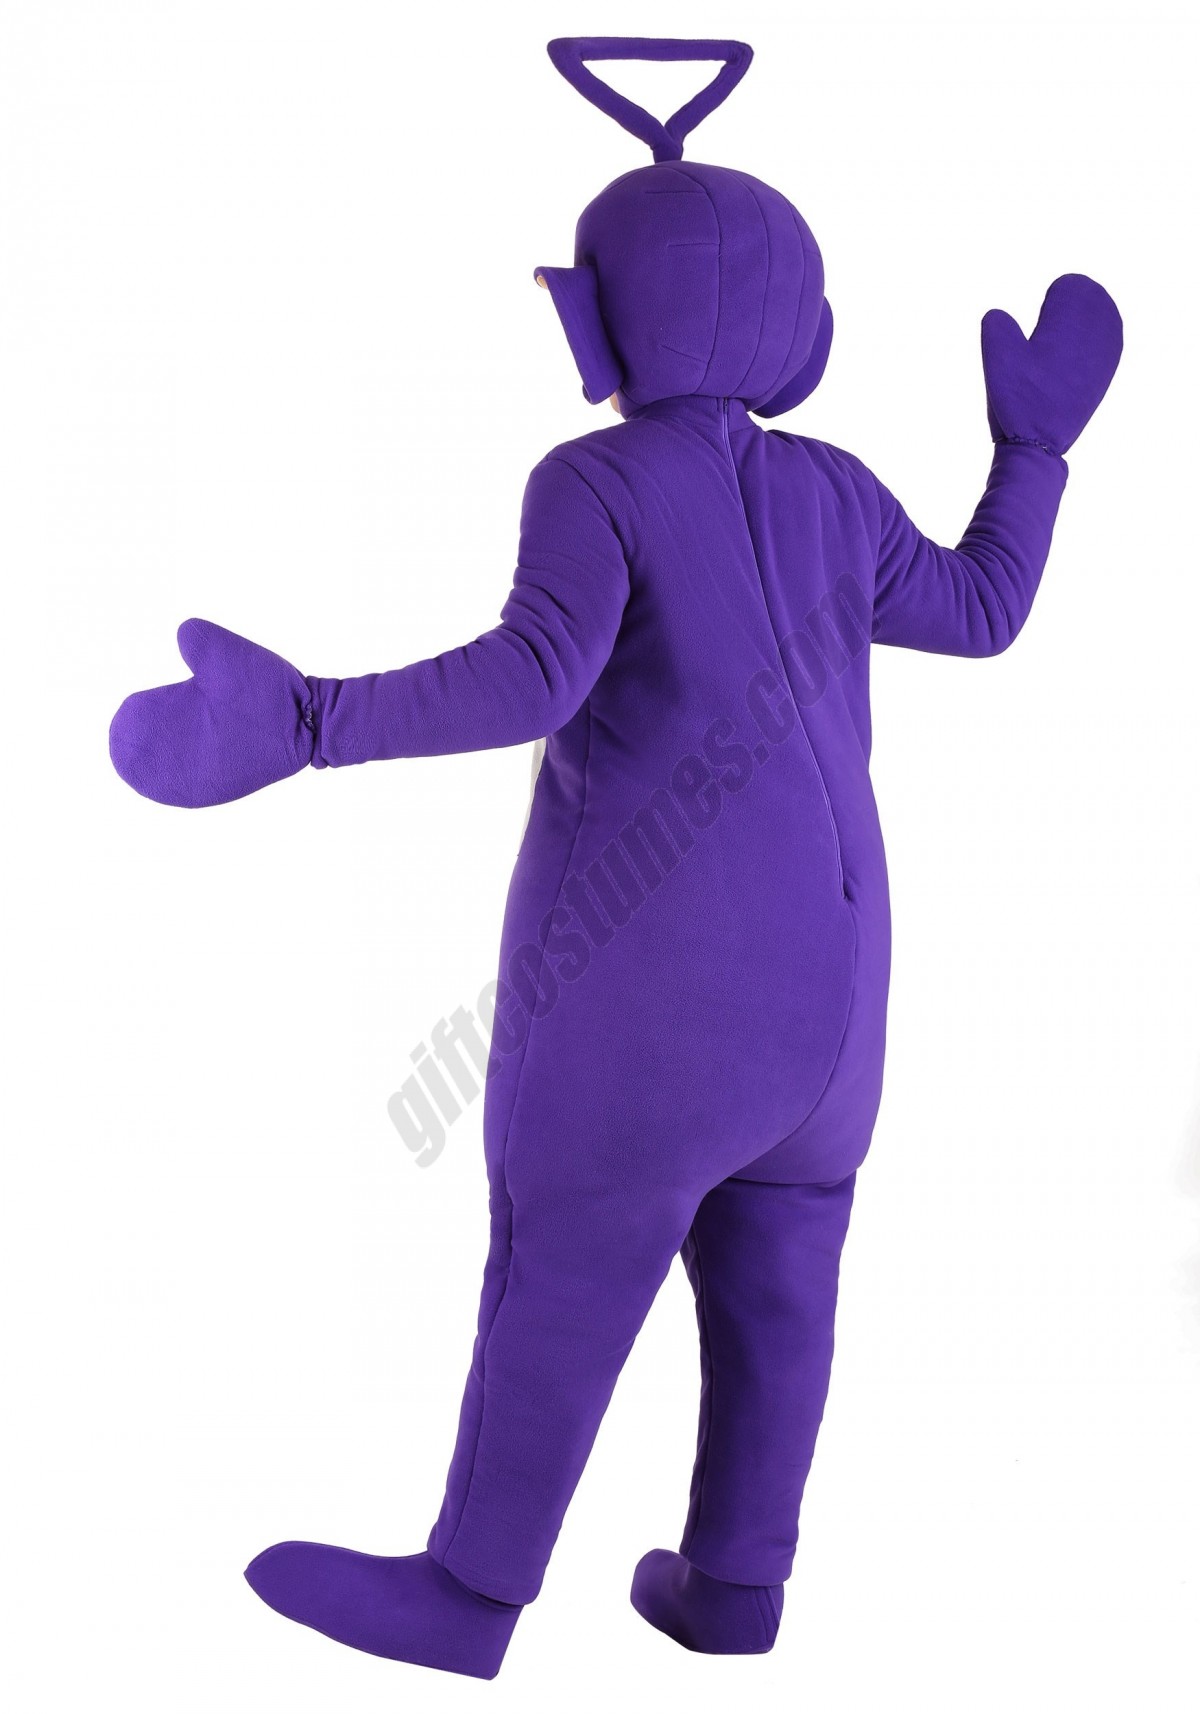 Tinky Winky Teletubbies Adult Costume Promotions - -1